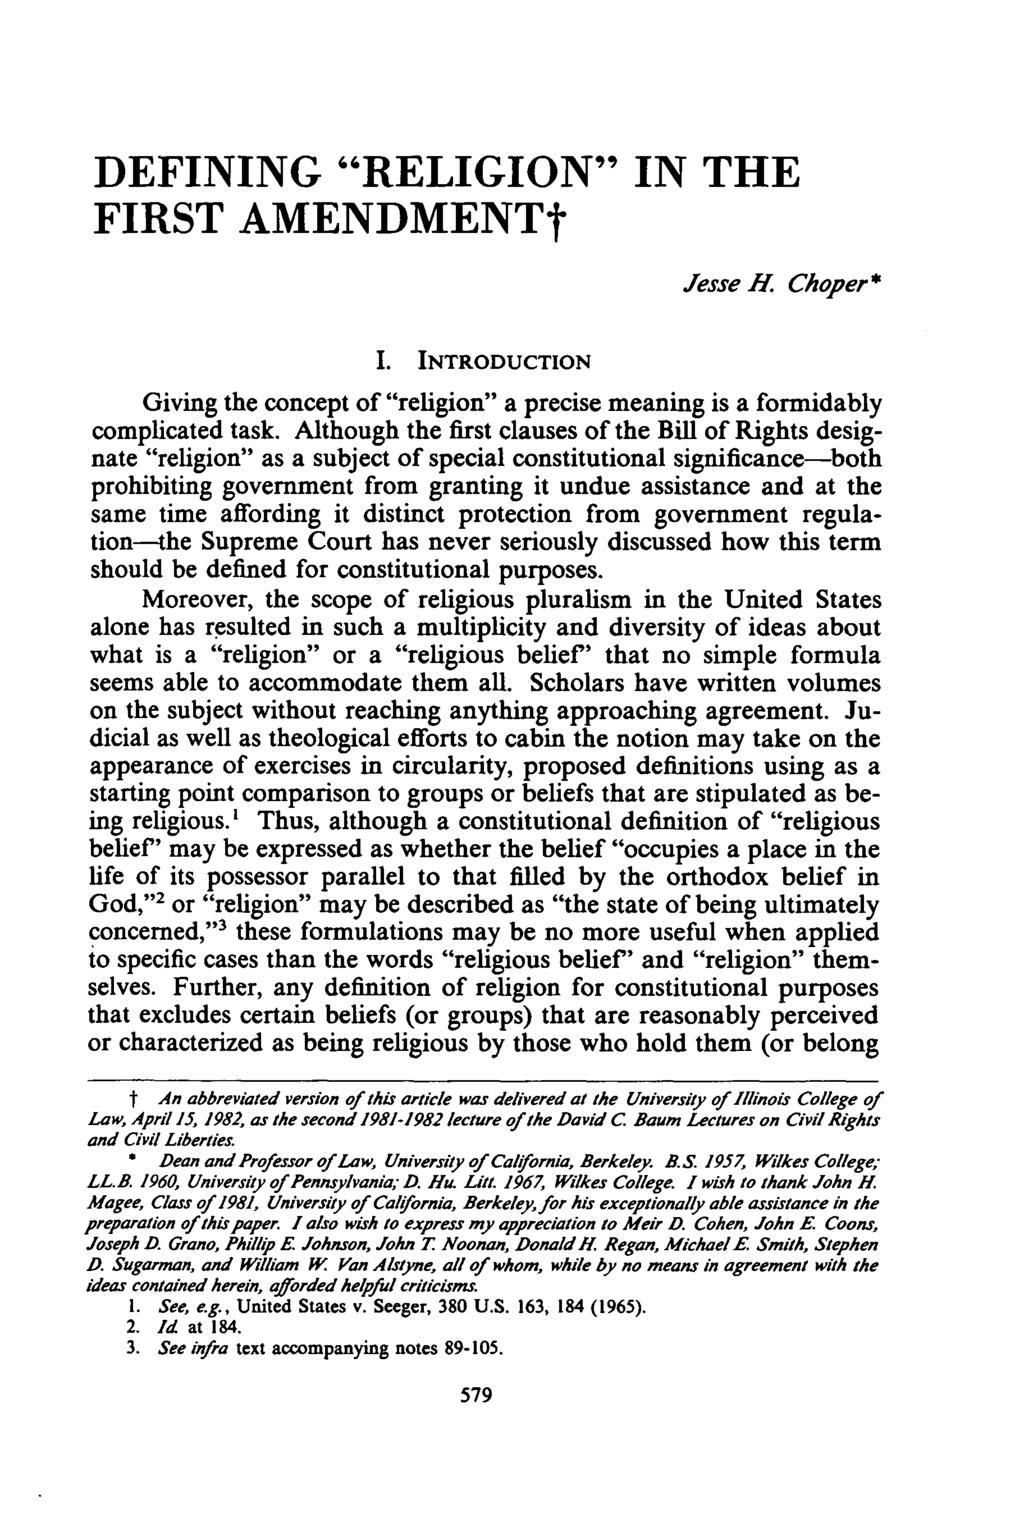 DEFINING "RELIGION" IN THE FIRST AMENDMENTt Jesse H. Choper* I. INTRODUCTION Giving the concept of "religion" a precise meaning is a formidably complicated task.